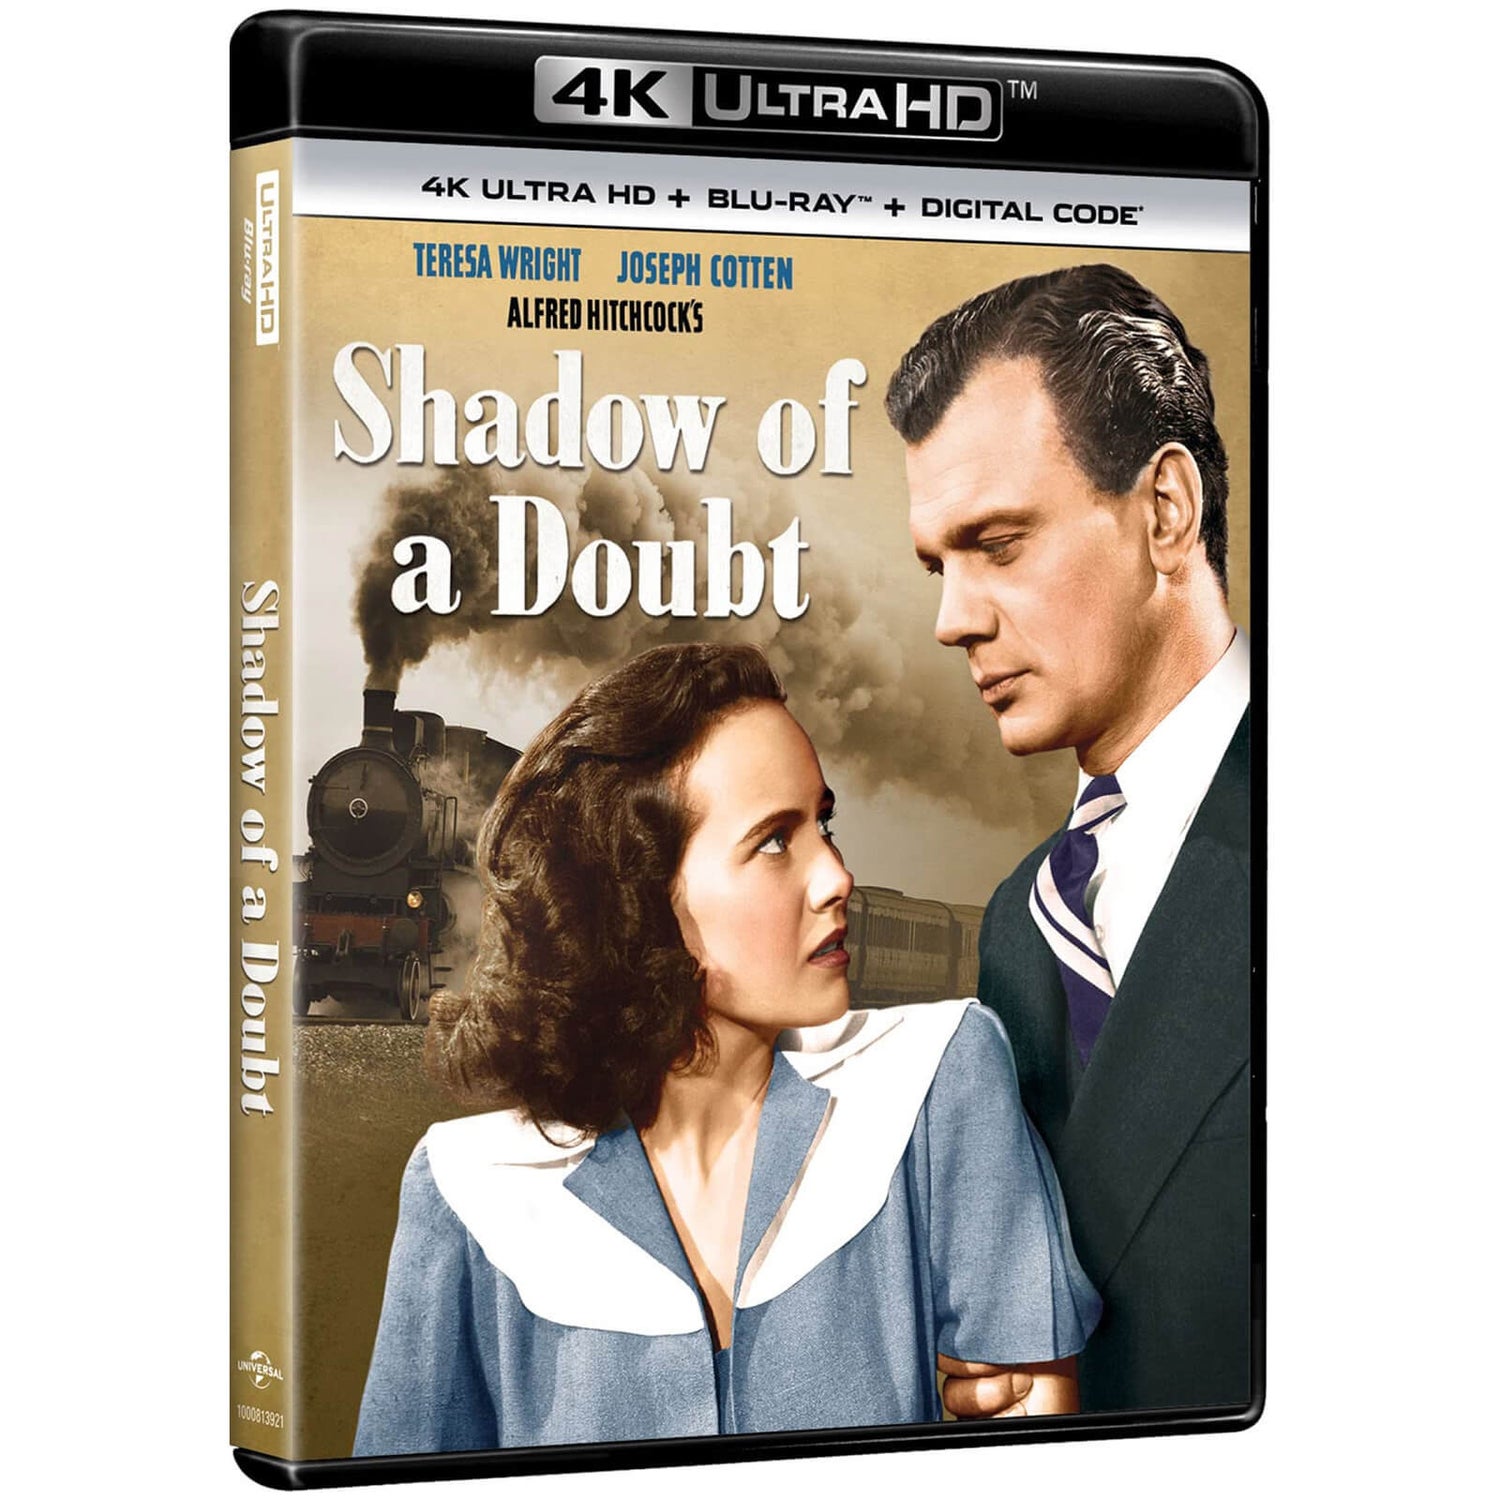 Shadow Of A Doubt - 4K Ultra HD (Includes Blu-ray)